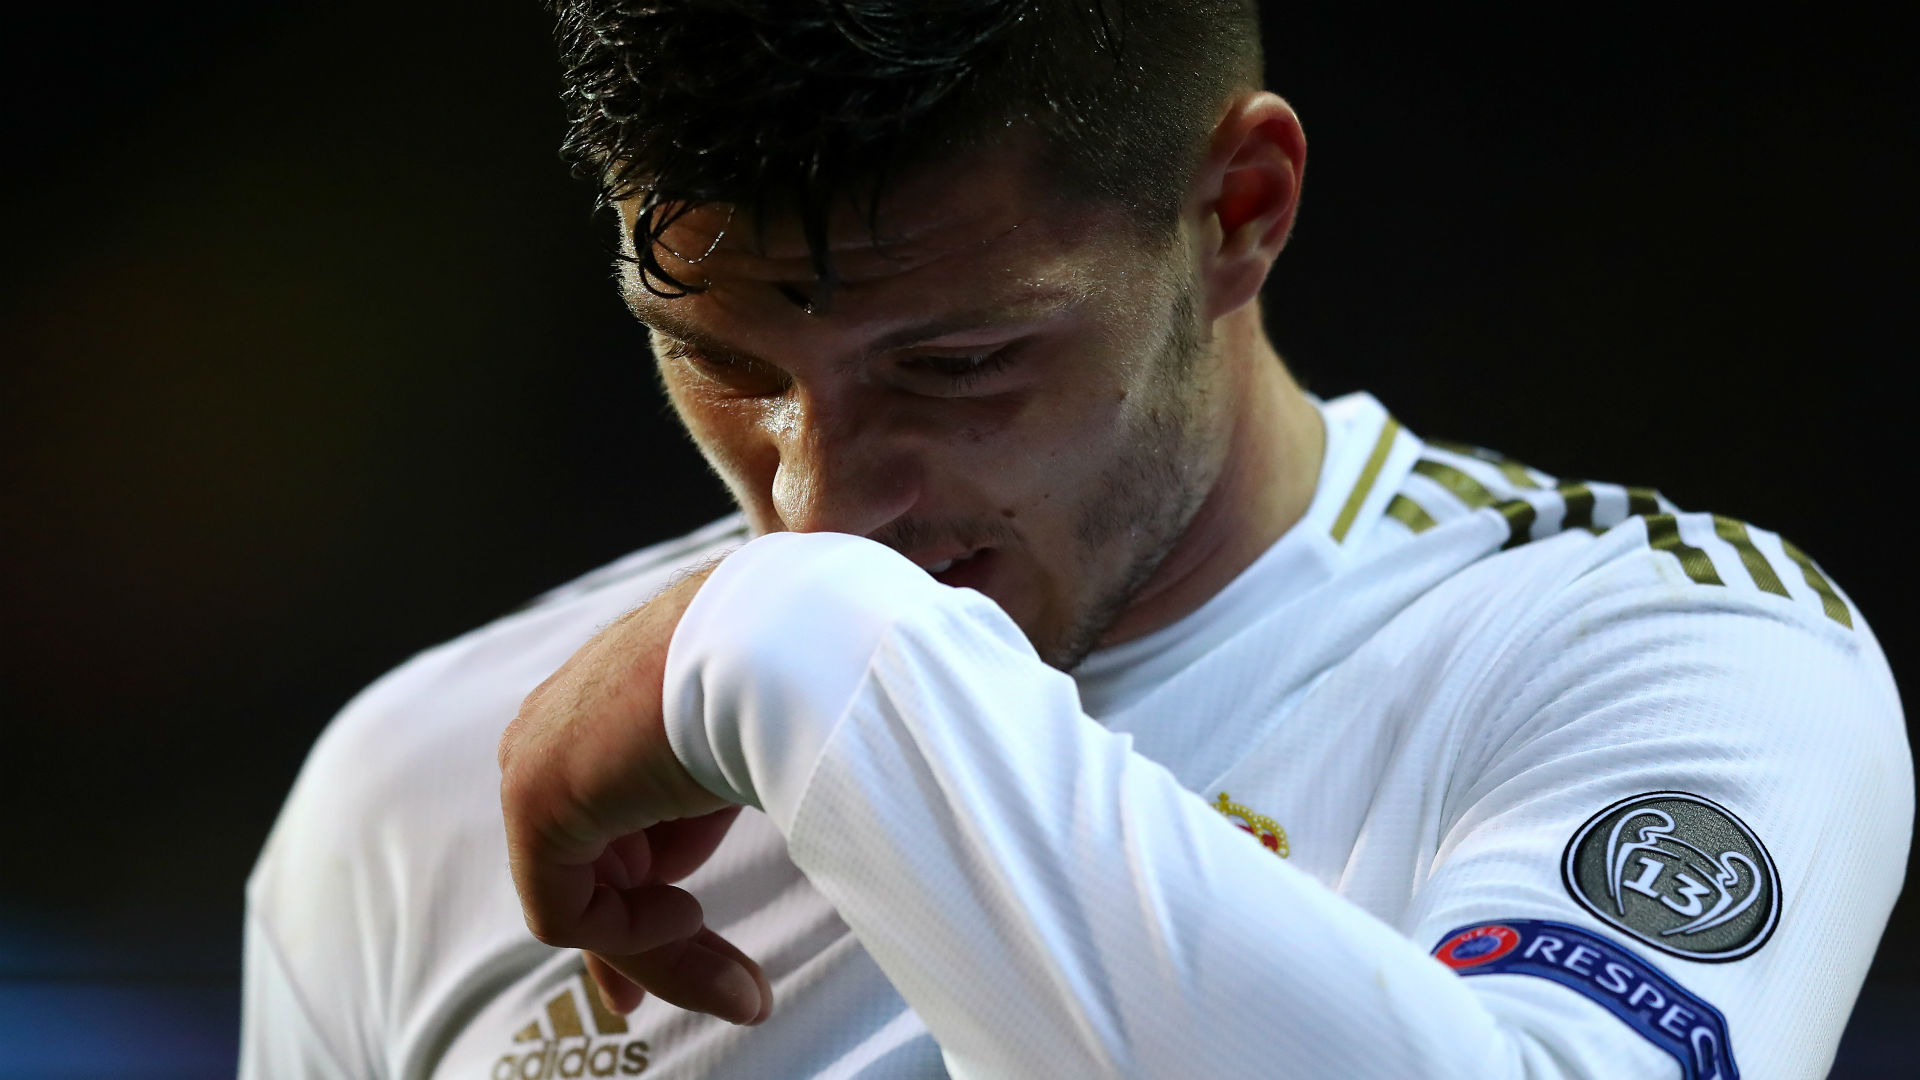 ‘Jovic needs a mentor to succeed at Real Madrid’ – Zidane’s faith not enough, says Paunovic